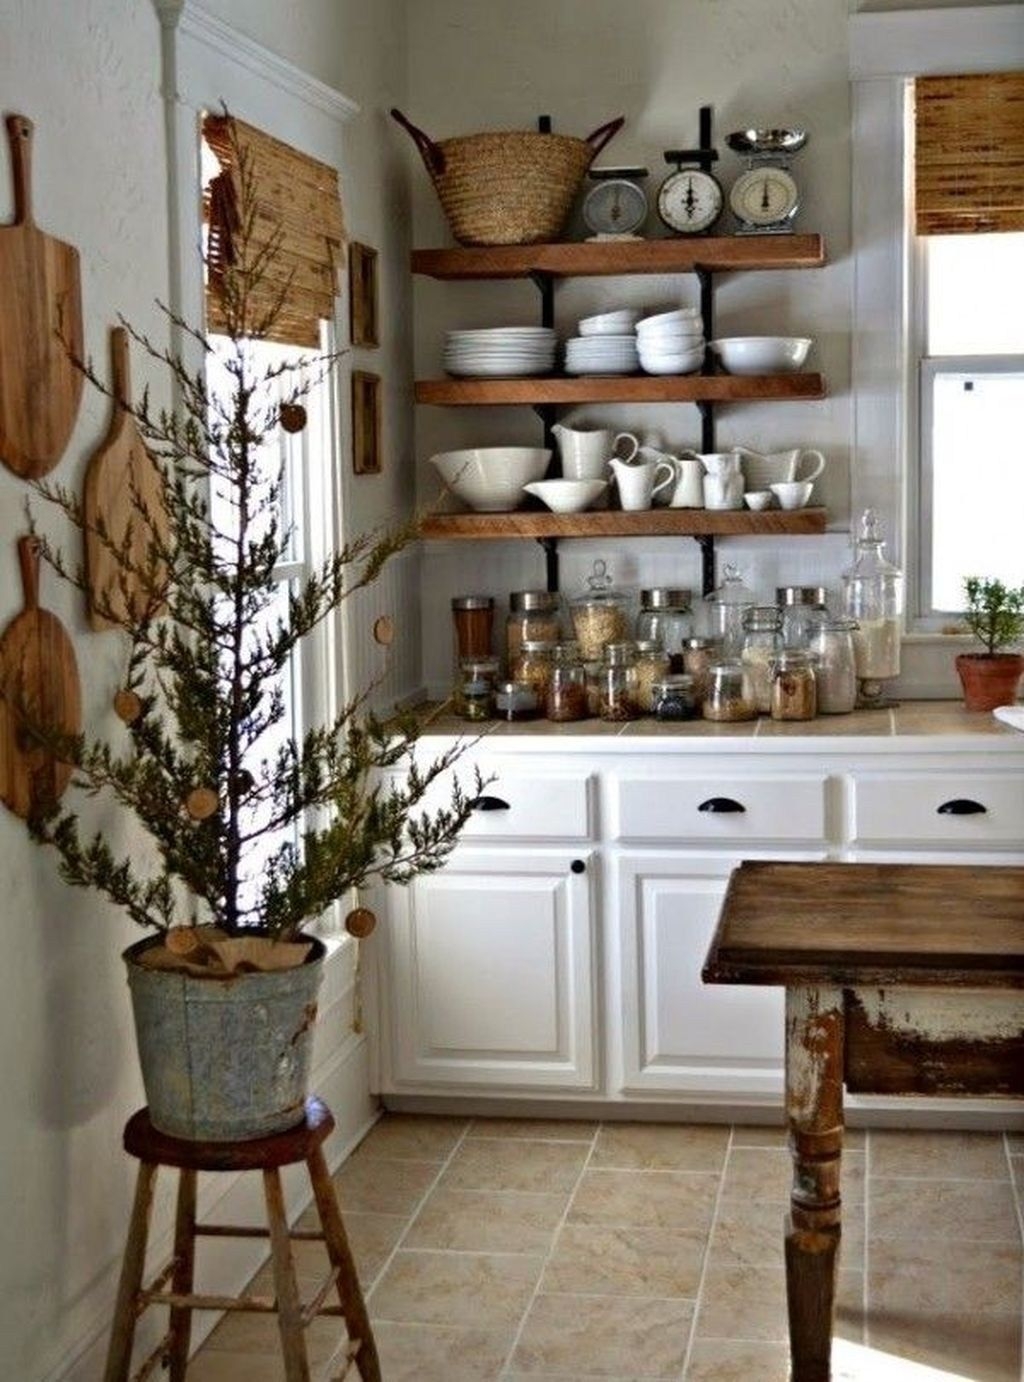 The Best French Country Style Kitchen Decor Ideas 06   PIMPHOMEE